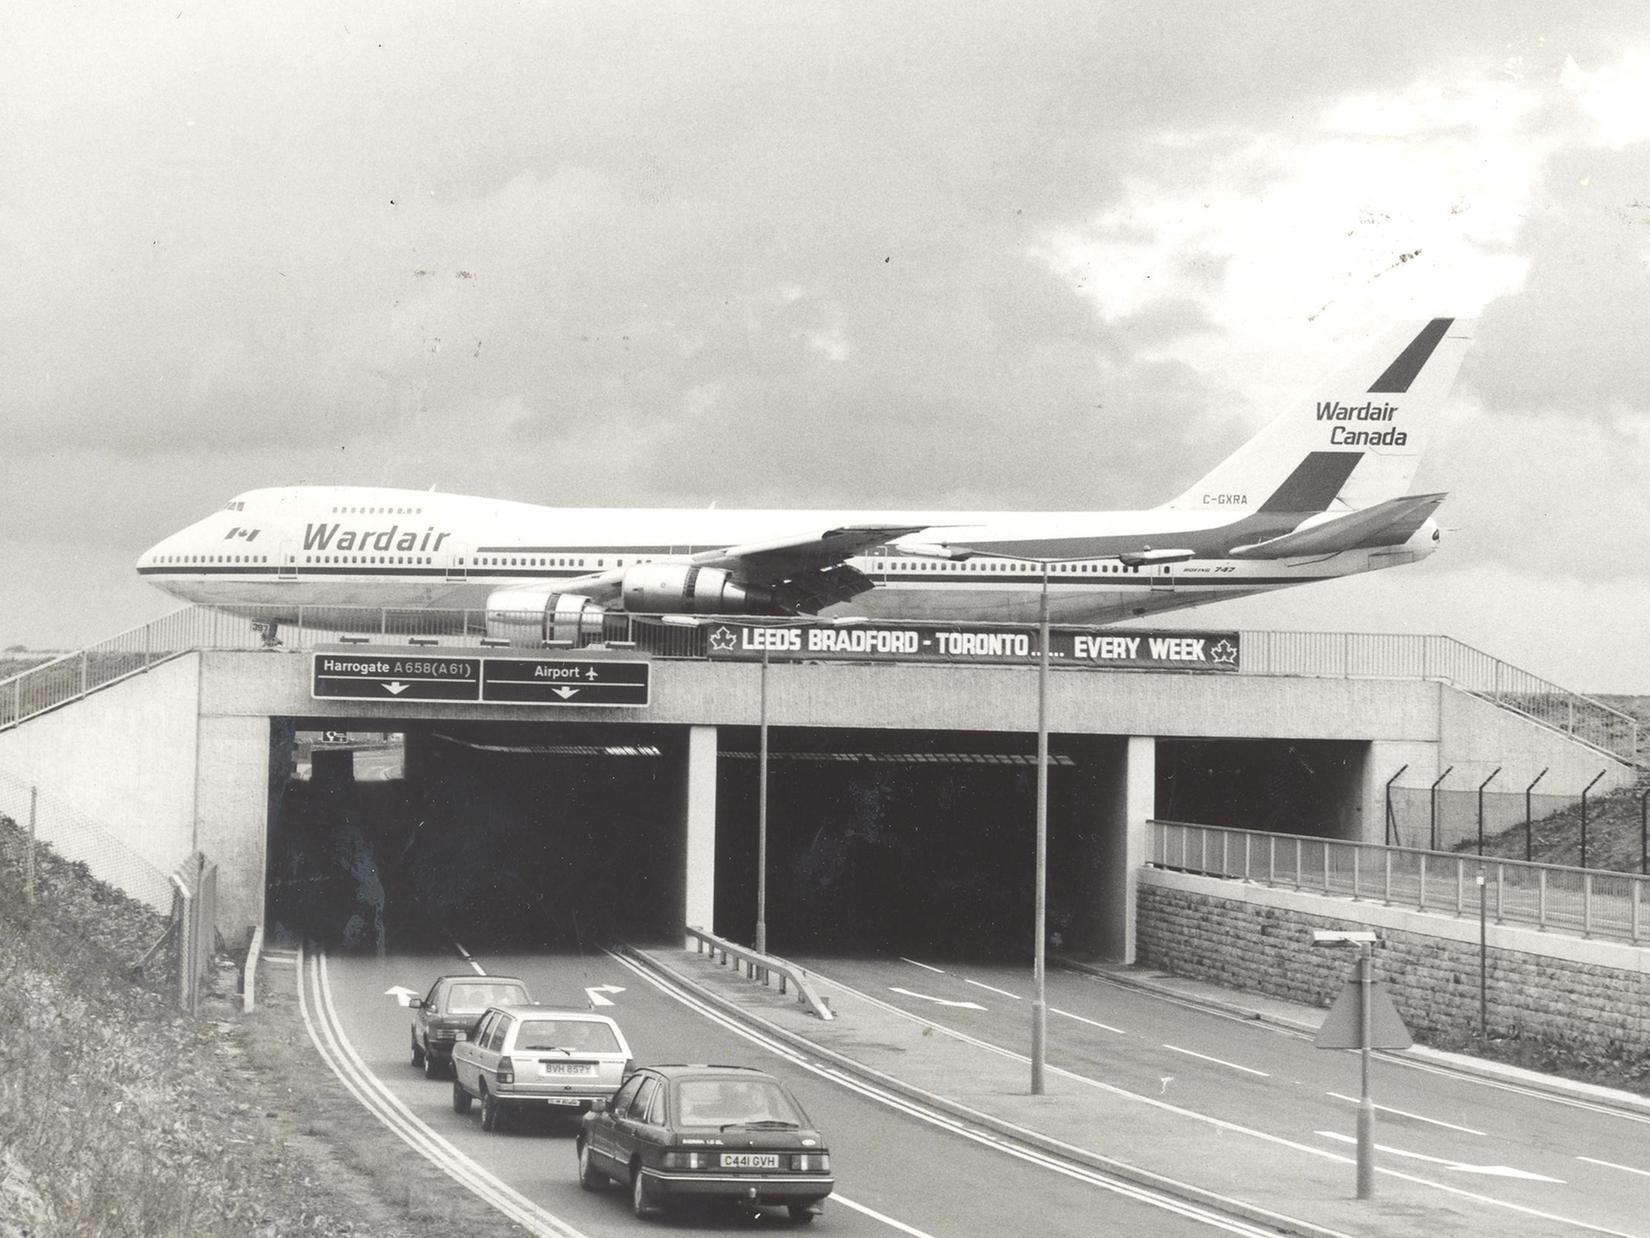 Take a trip down memory lane with these photos from Leeds Bradford Airport during the 1980s.